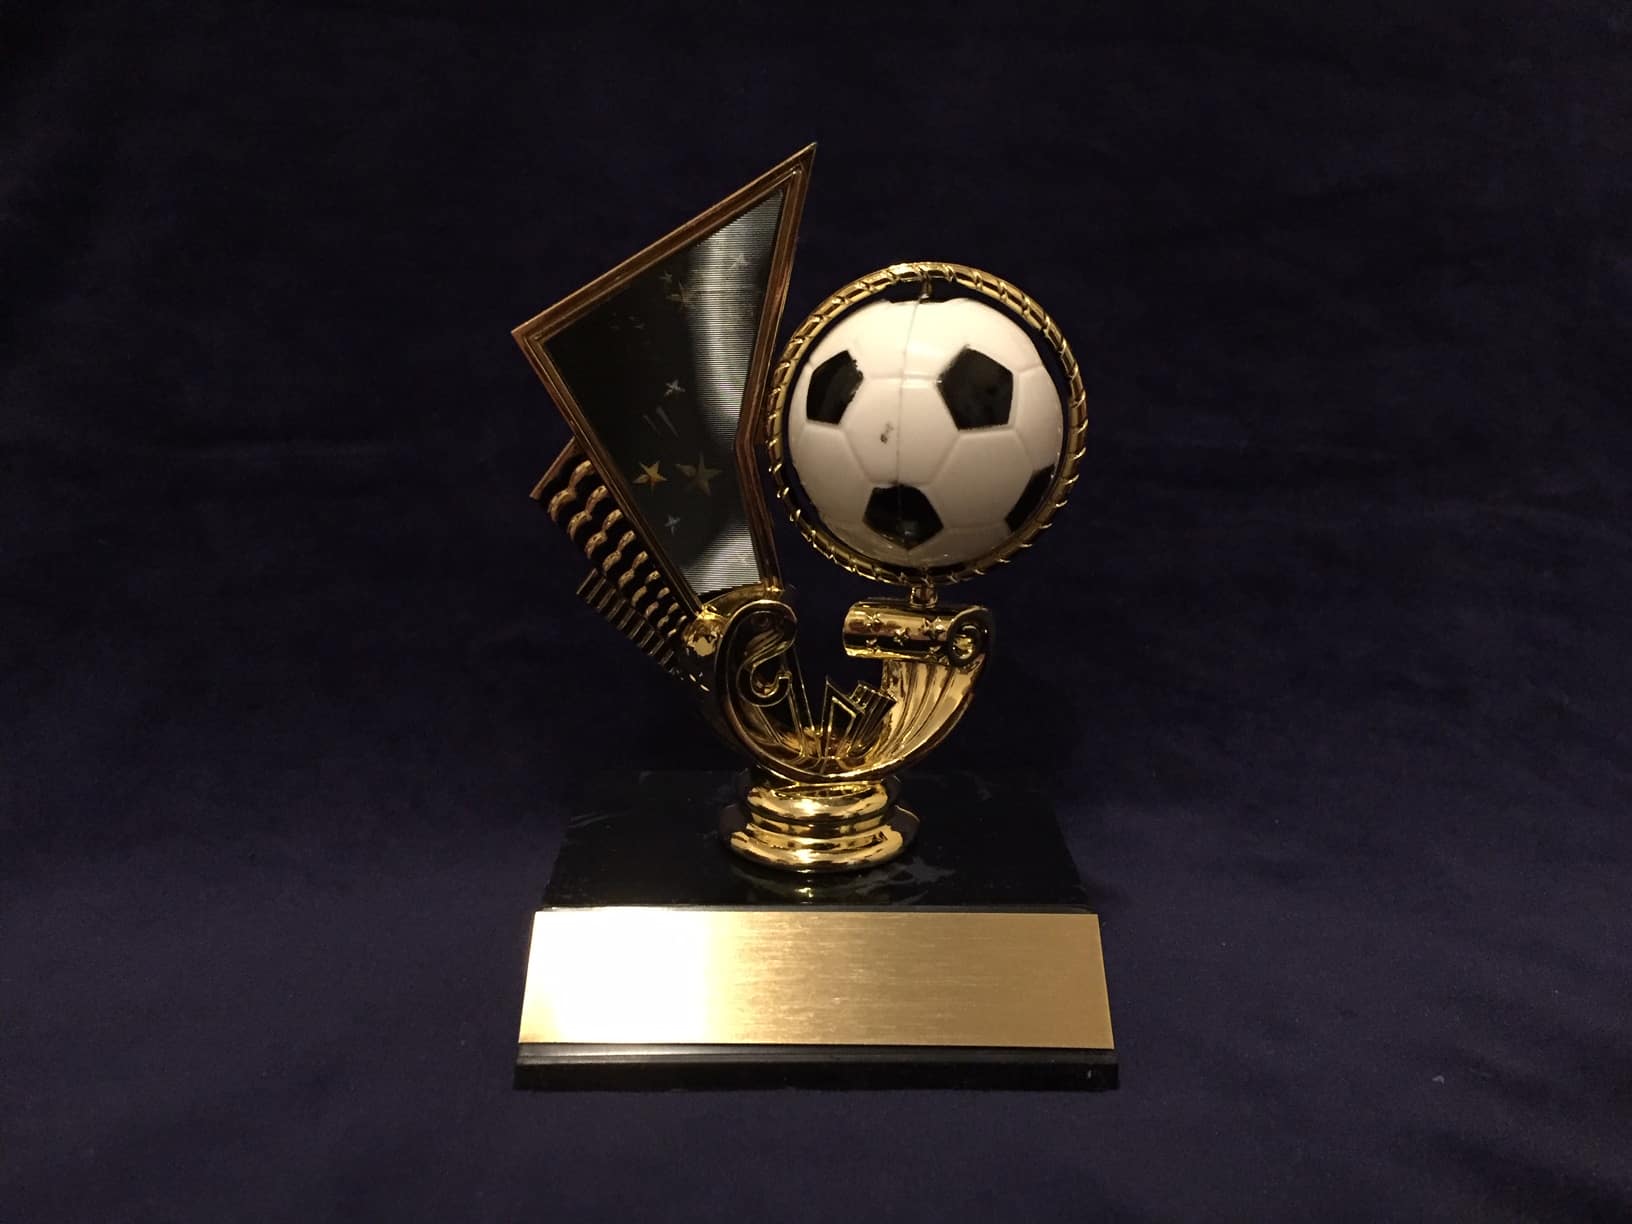 FOOTBALL SOCCER CRYSTAL BLUE AWARD BOOT AND BALL TROPHY ENGRAVED FREE TROPHIES 